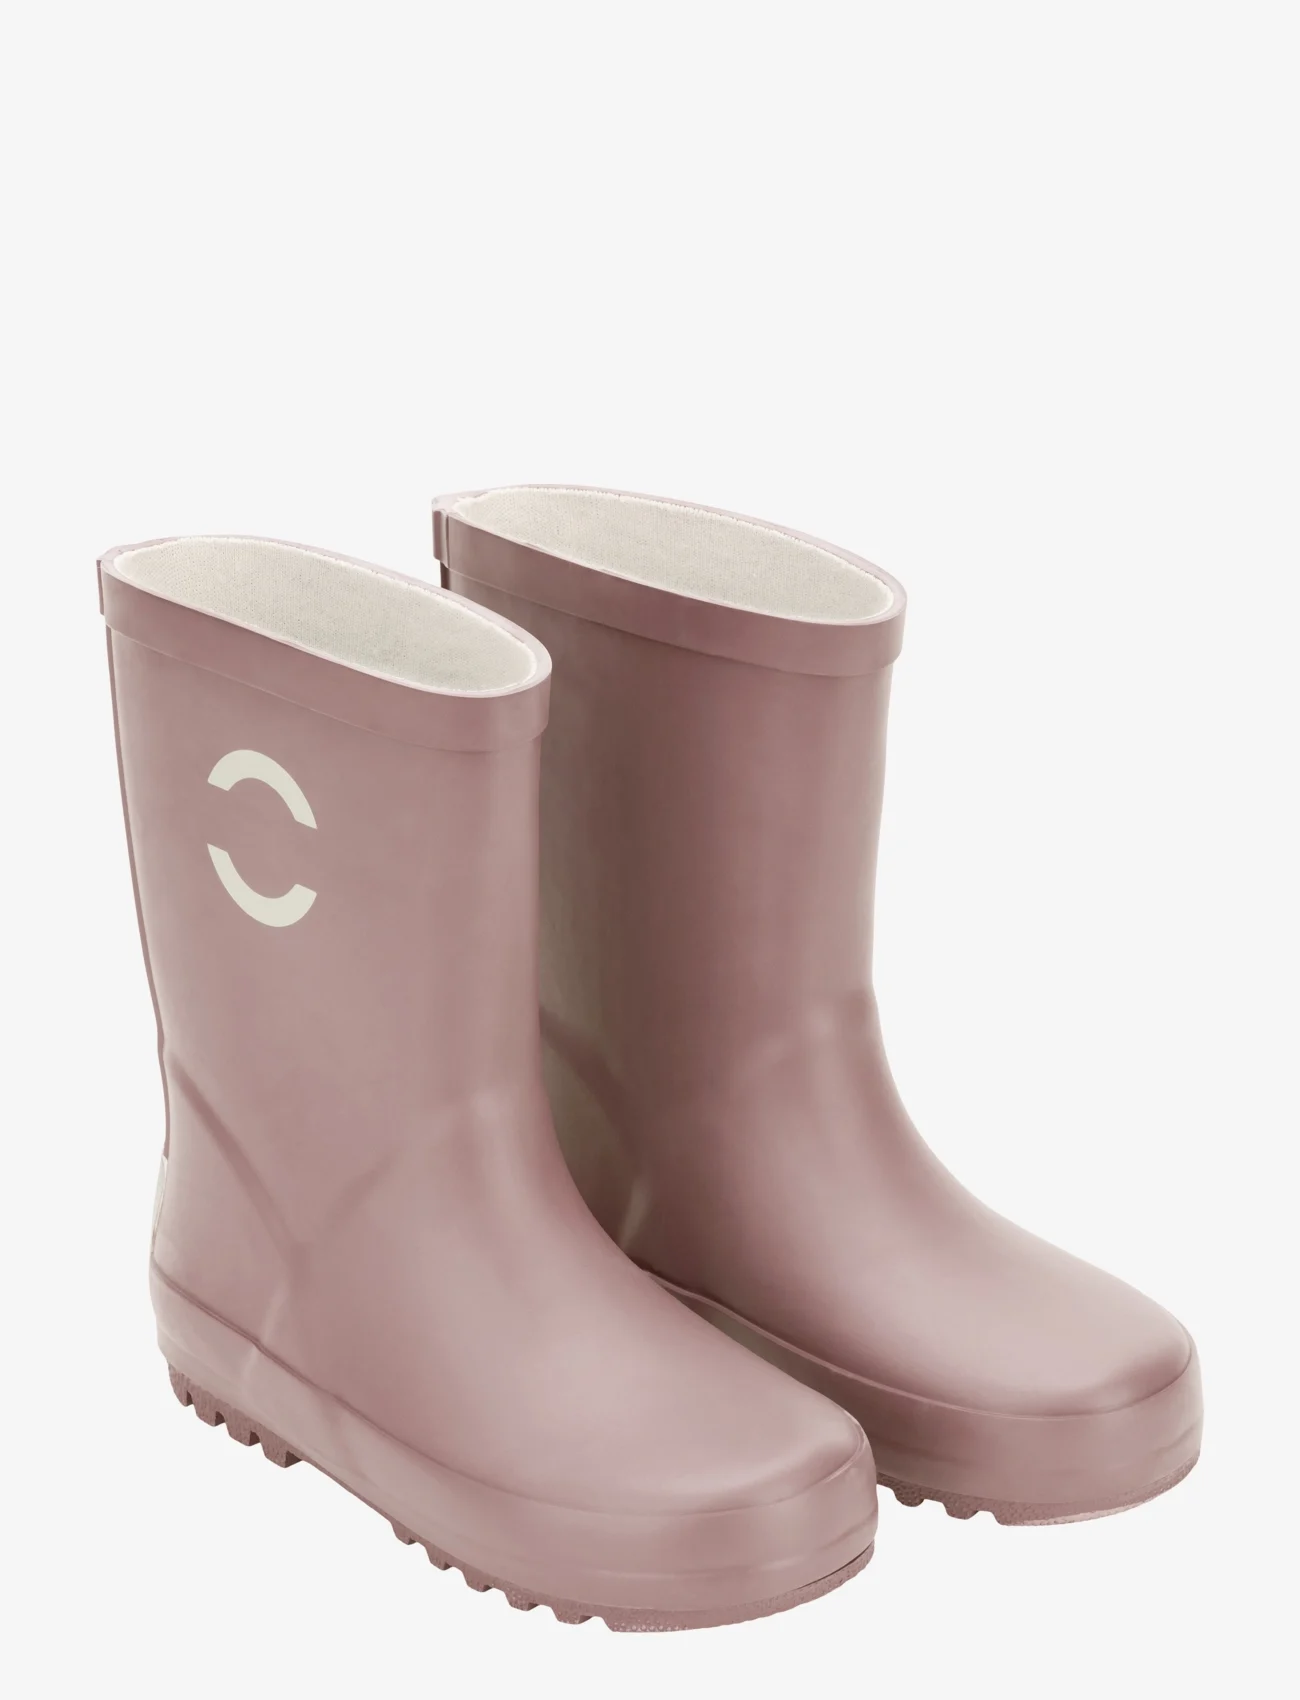 mikk-line - Wellies - Solid - unlined rubberboots - adobe rose - 0